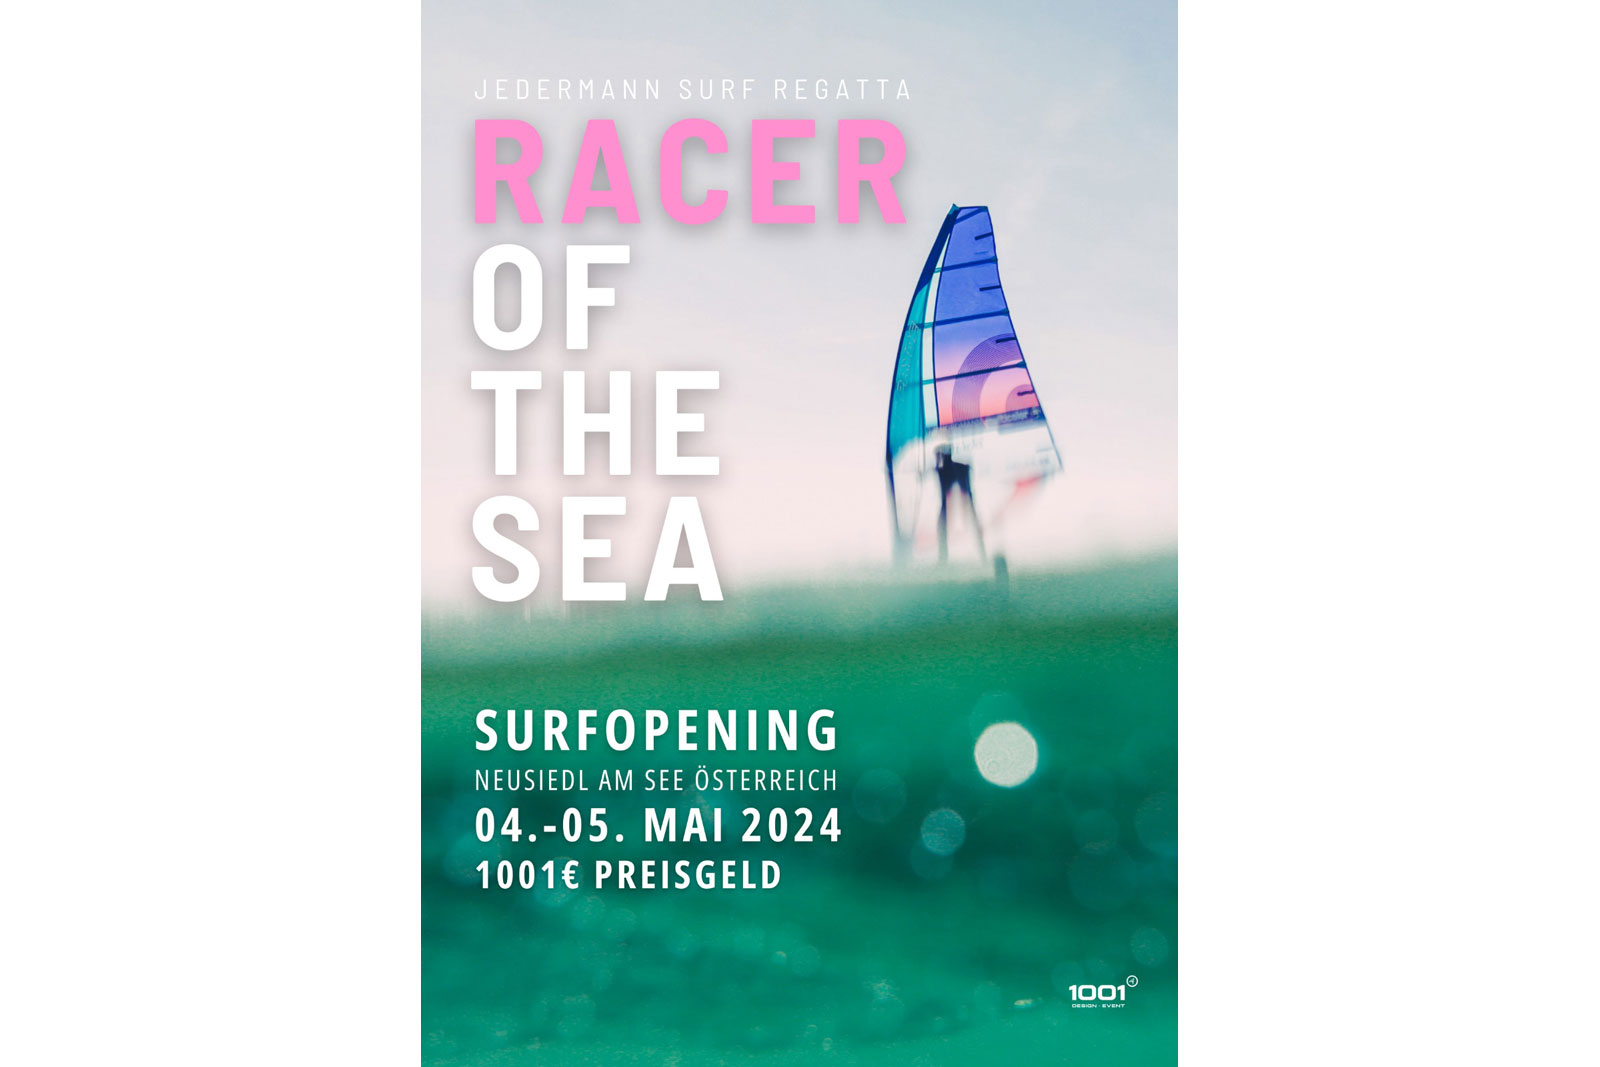 Racer of the Sea goes Austria